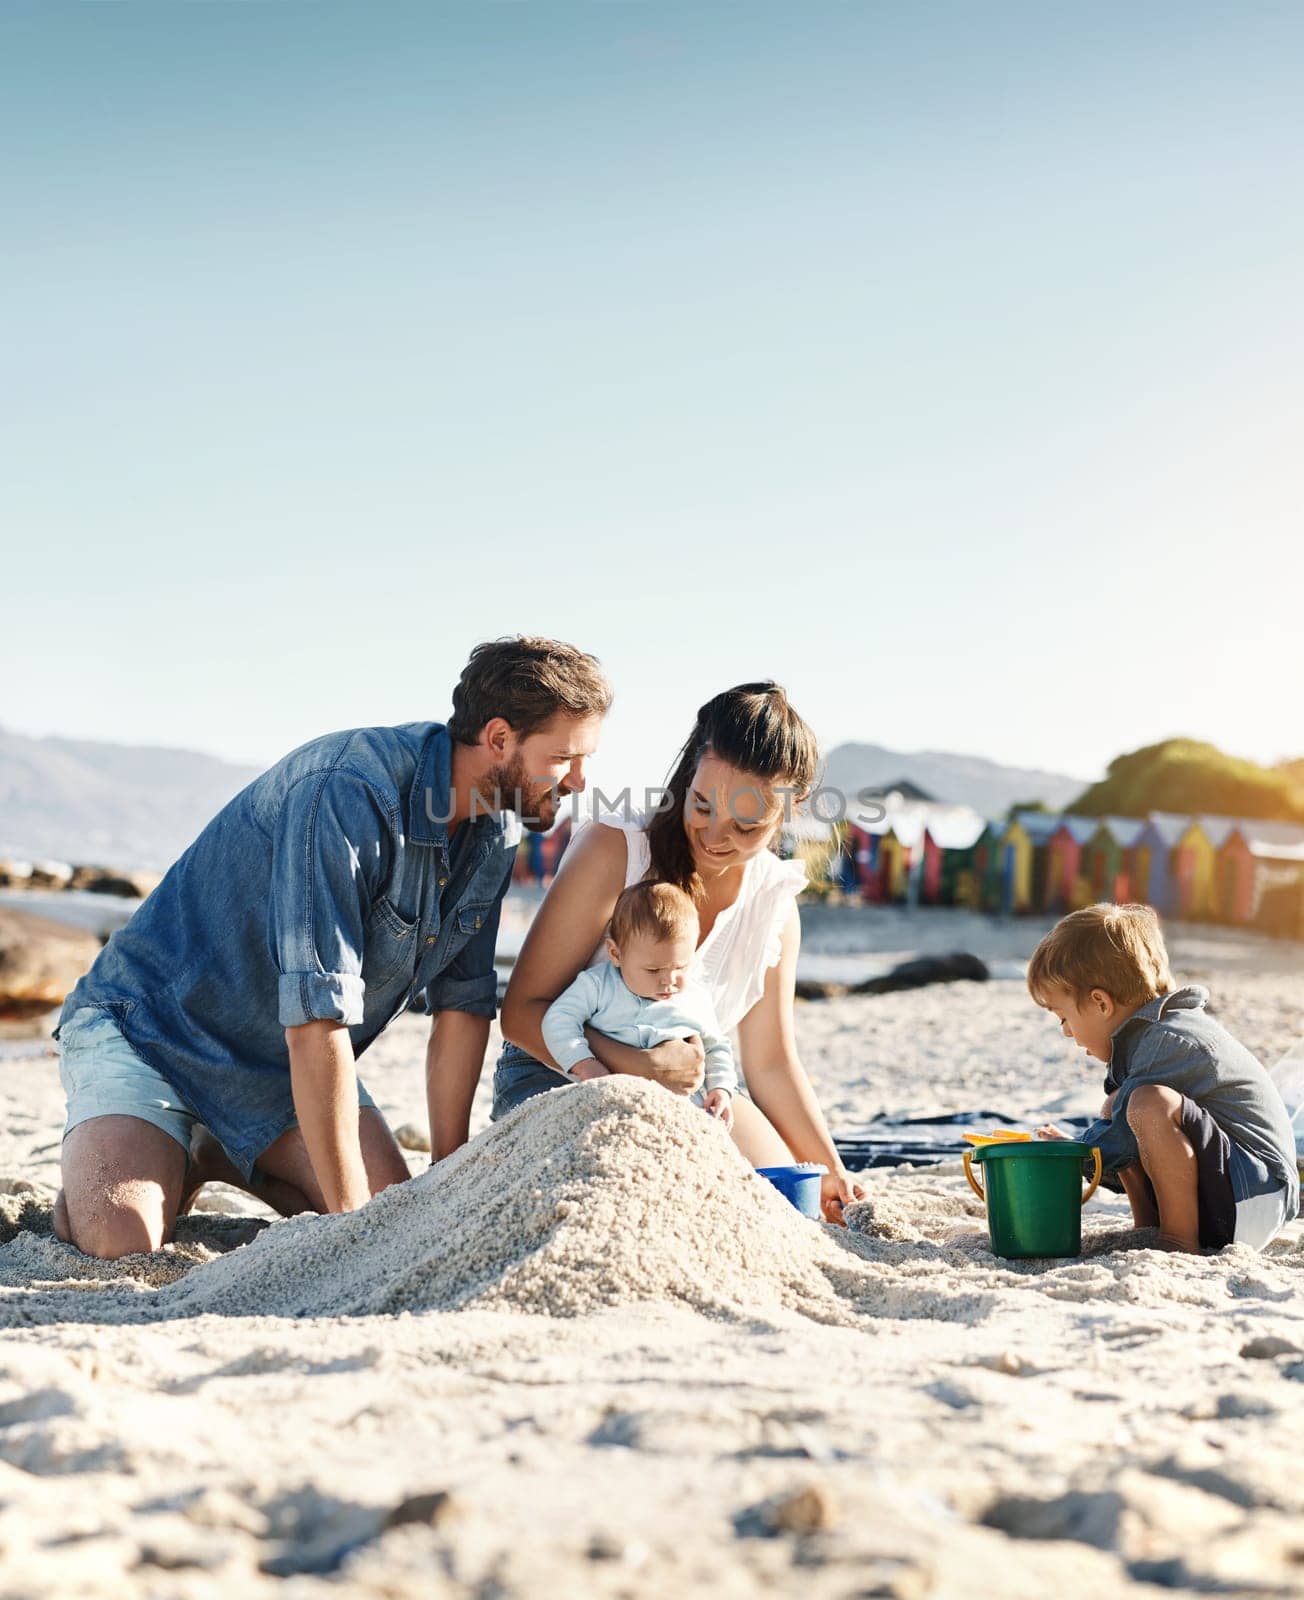 Sandcastle, holiday and children at the beach with family, love and support. Baby, mom and dad together with kids playing in the sun with happiness and smile by the ocean and mockup with bonding.